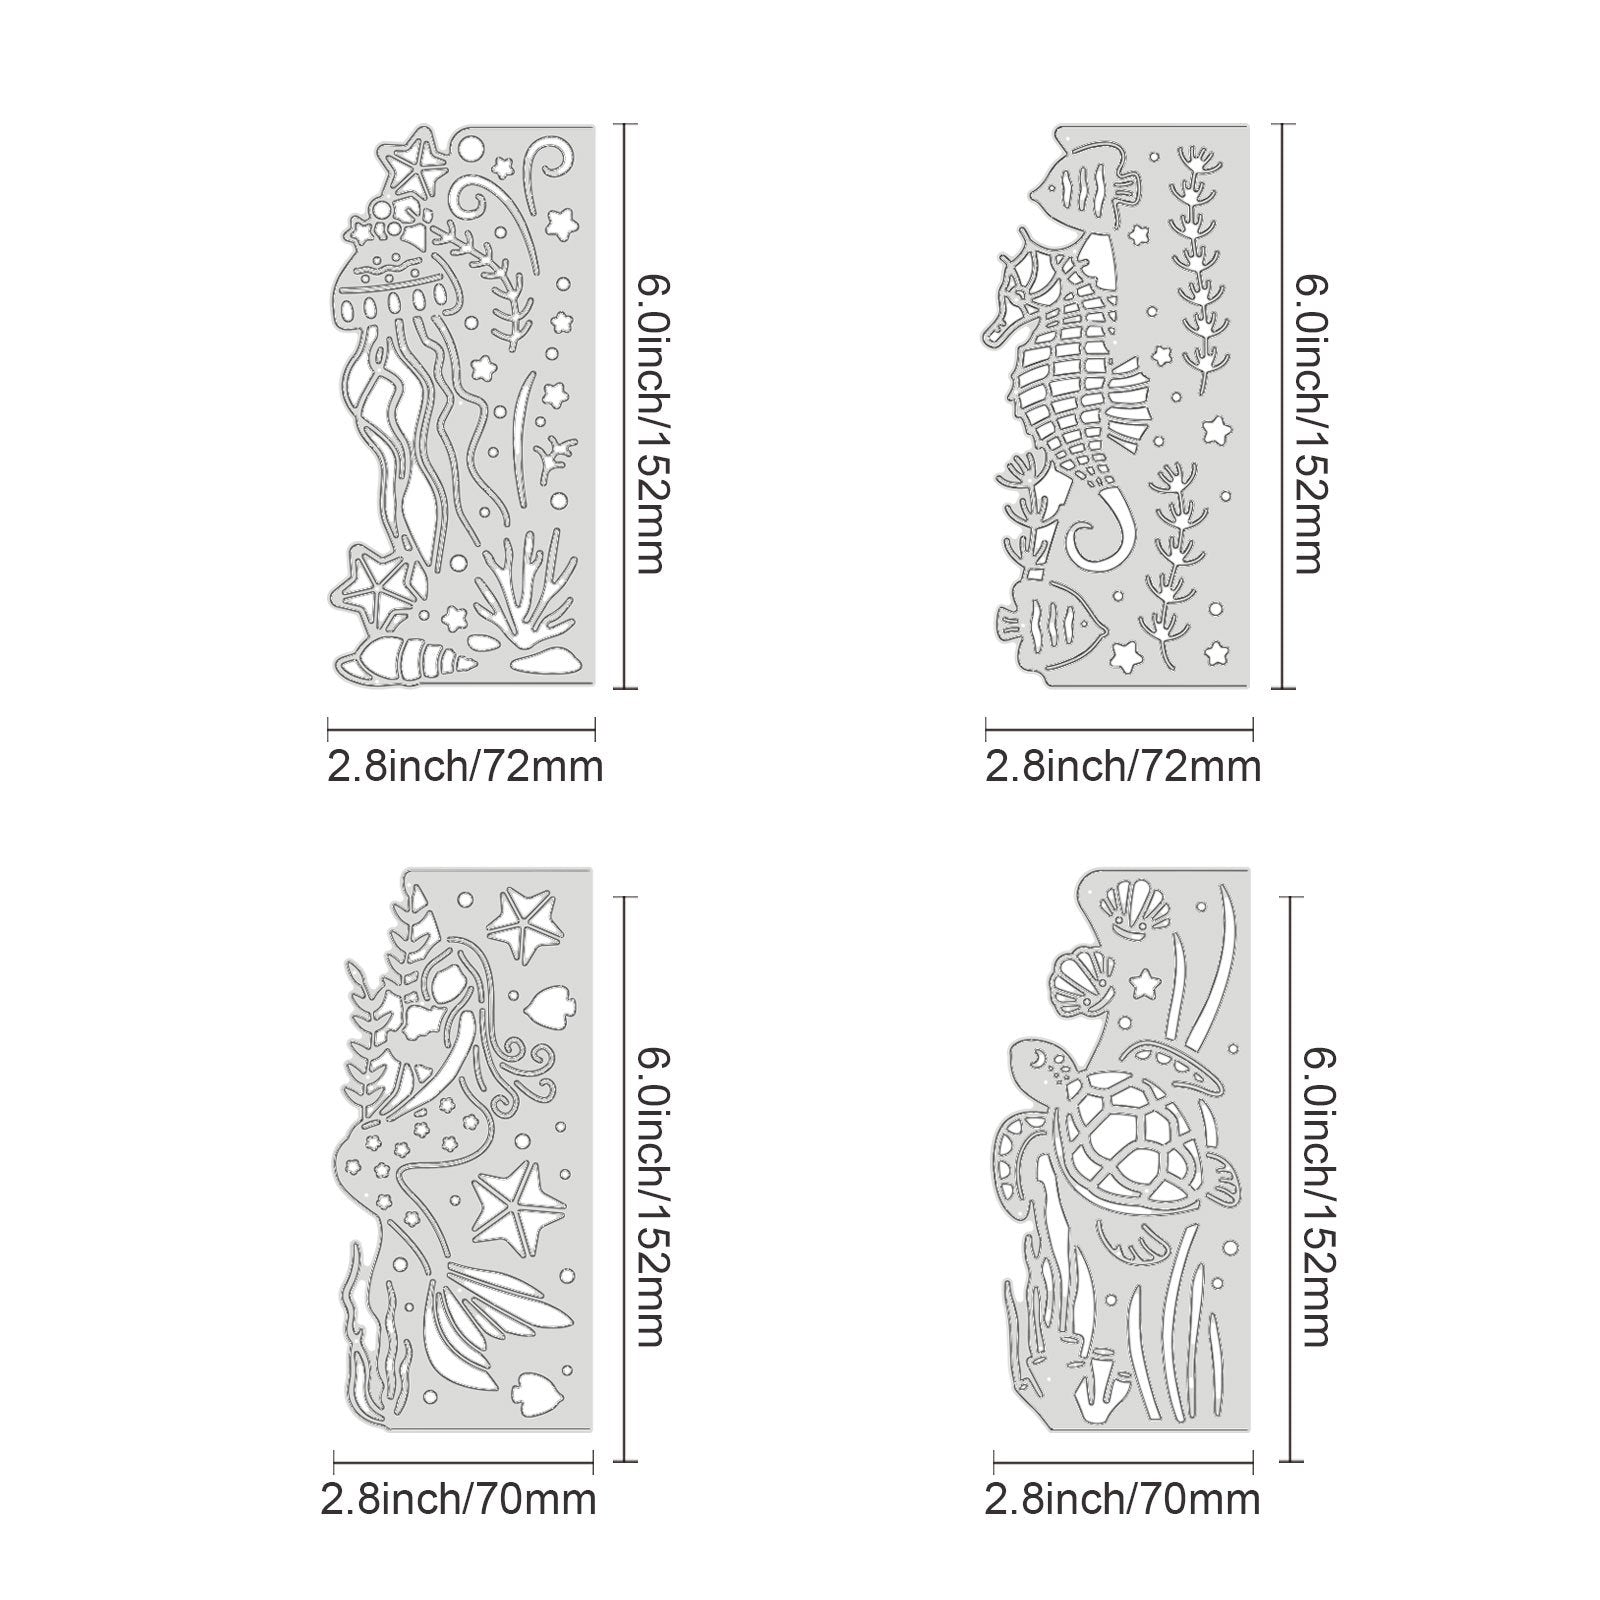 CRASPIRE 4 Pcs 4 Styles Carbon Steel Cutting Dies Stencils, for DIY Scrapbooking/Photo Album, Decorative Embossing DIY Paper Card, Mixed Patterns, 7.2x15.2x0.08cm, 1pc/style